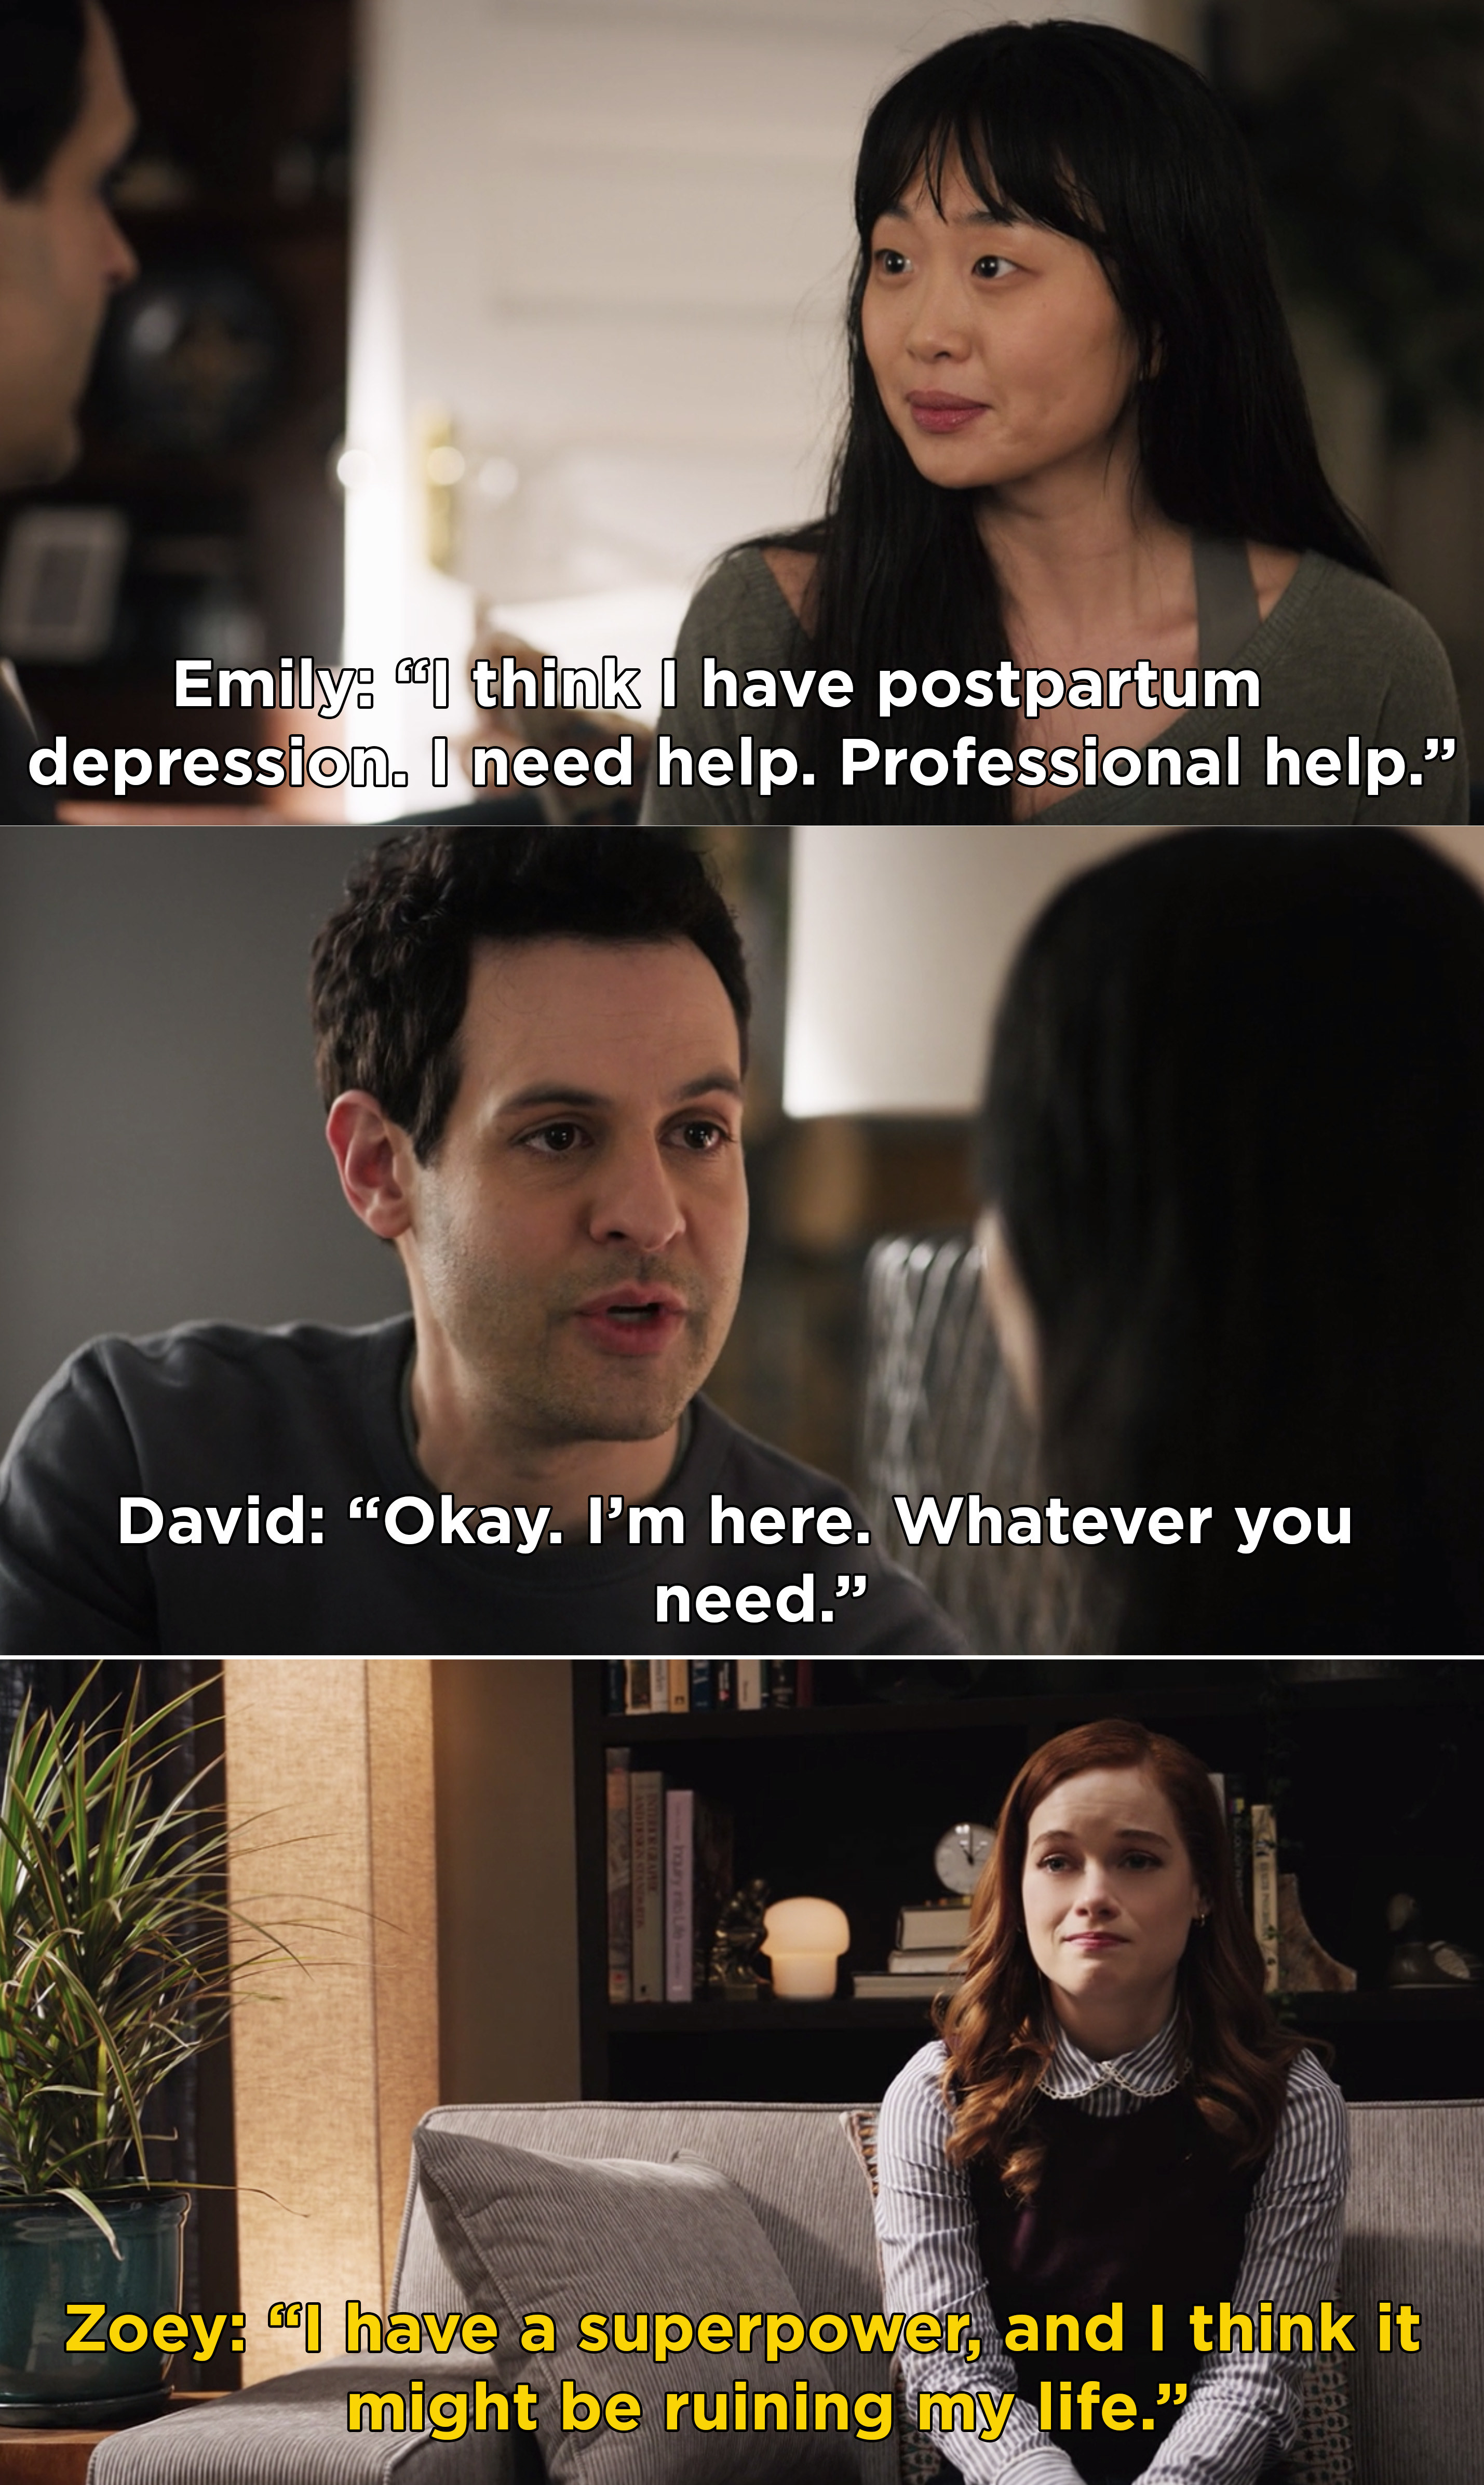 Emily telling David she has postpartum depression and needs help, and then Zoey telling her therapist she has a superpower